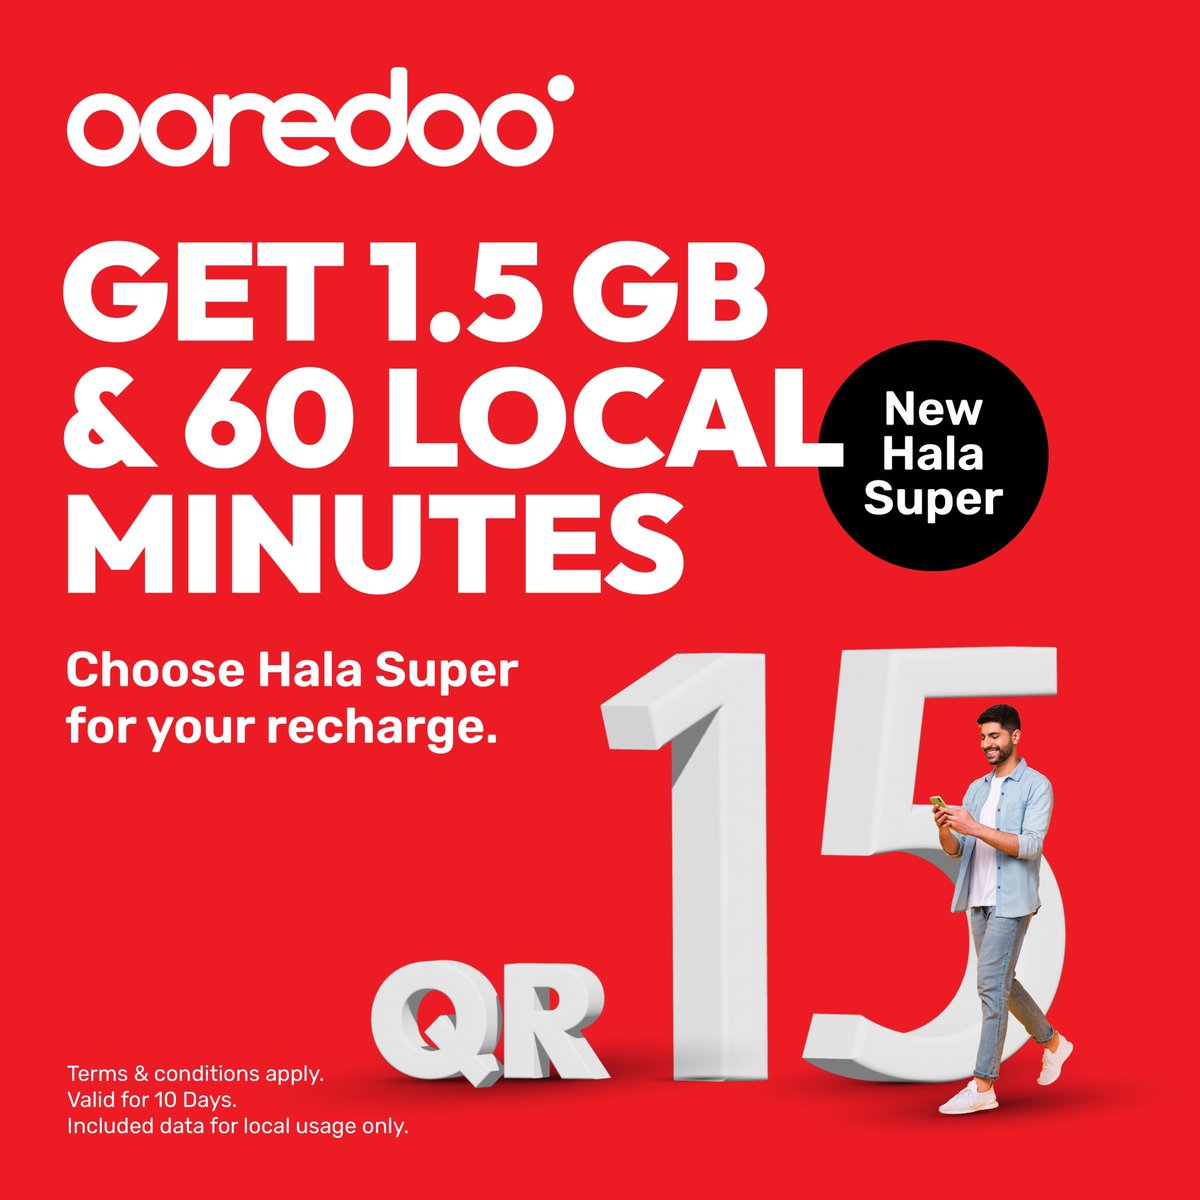 🔴 Recharge with Hala Super and get 1.5 GB data + 60 local minutes valid for 10 days. 🌟 *T&Cs apply. #Ooredoo #UpgradeYourWorld #HalaSuper